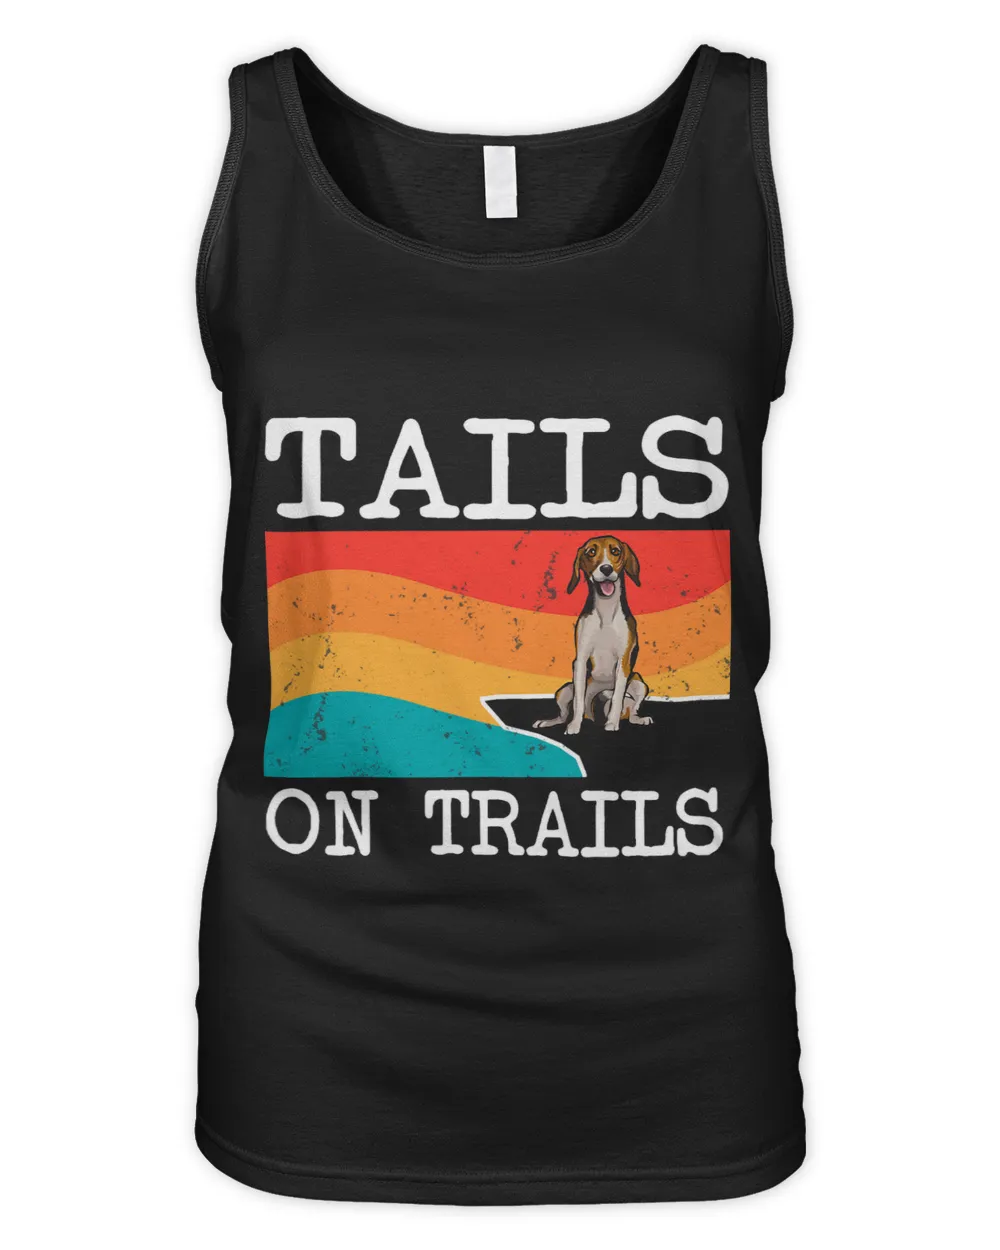 Tails On Trails American Foxhound Dog Funny Hiking 2